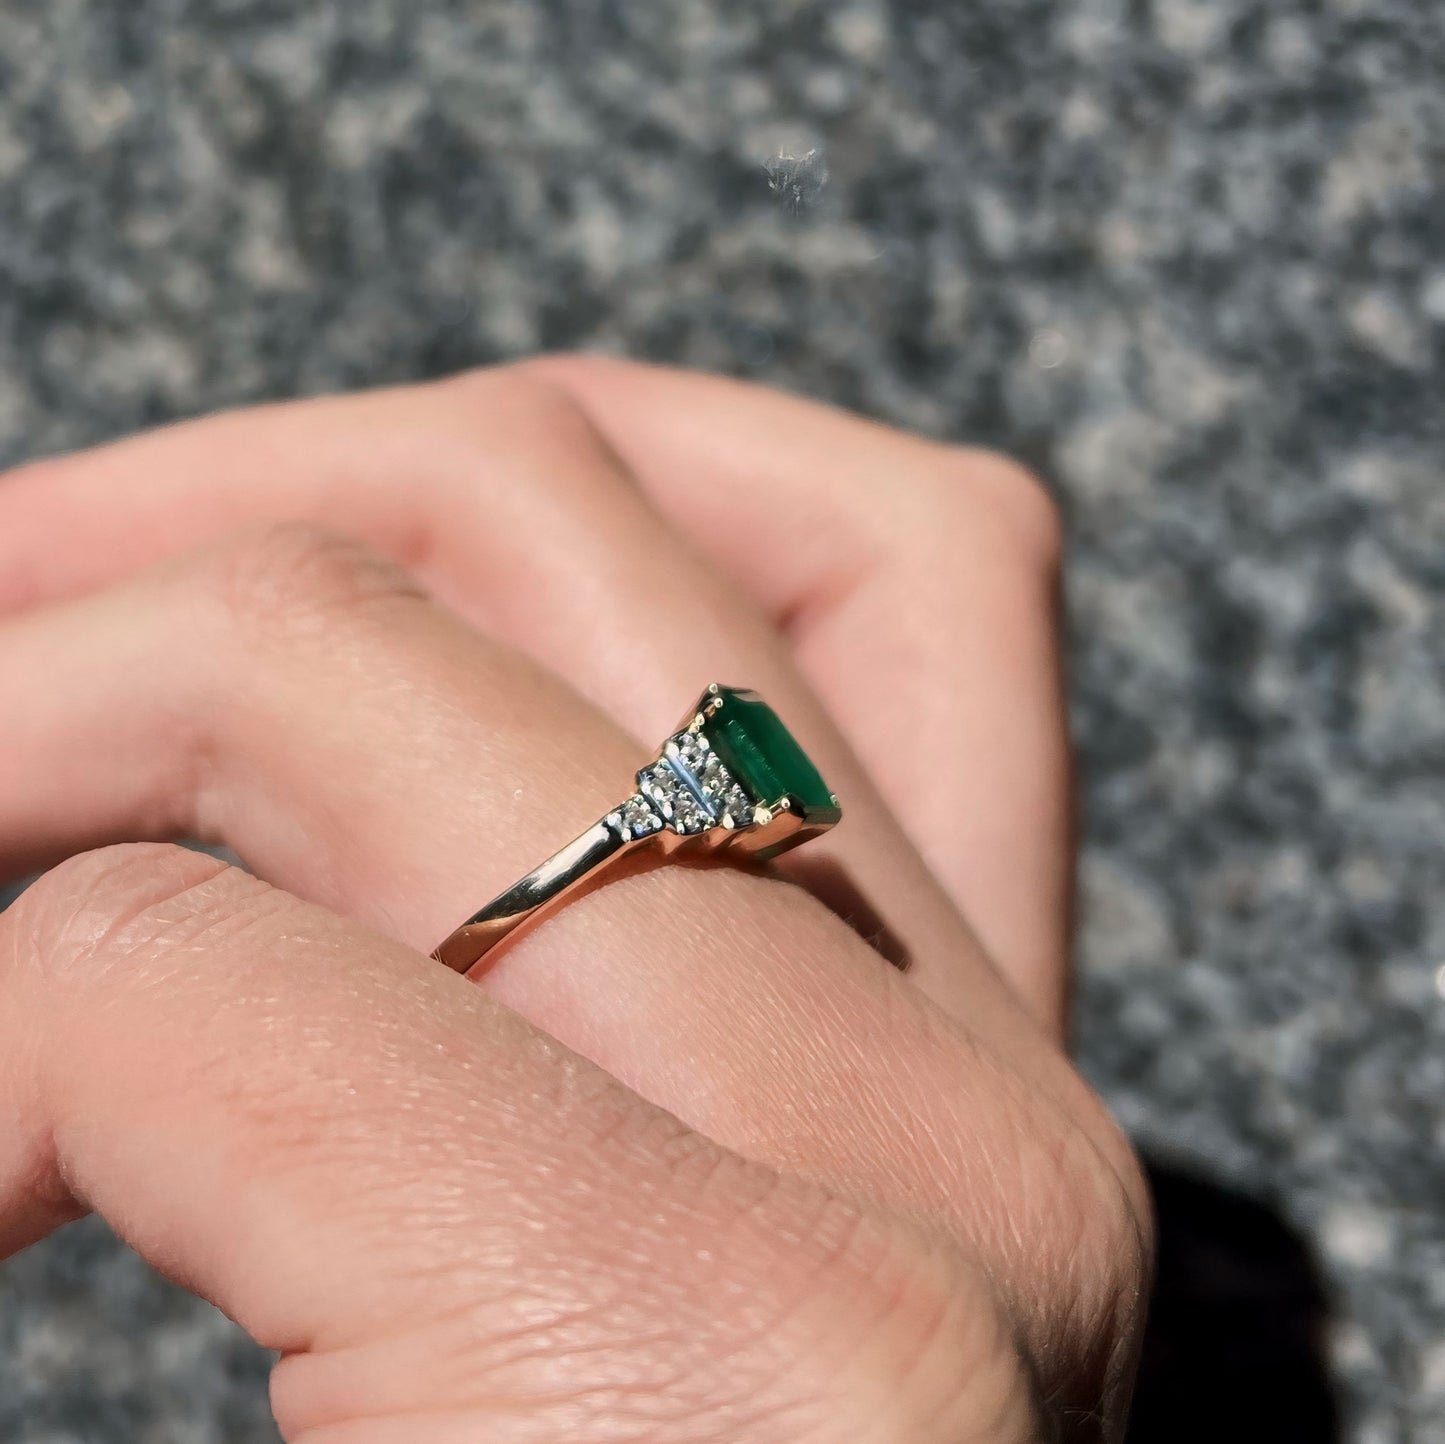 9ct Yellow Gold Art Deco Inspired Emerald and Diamond Ring - Size N1/2